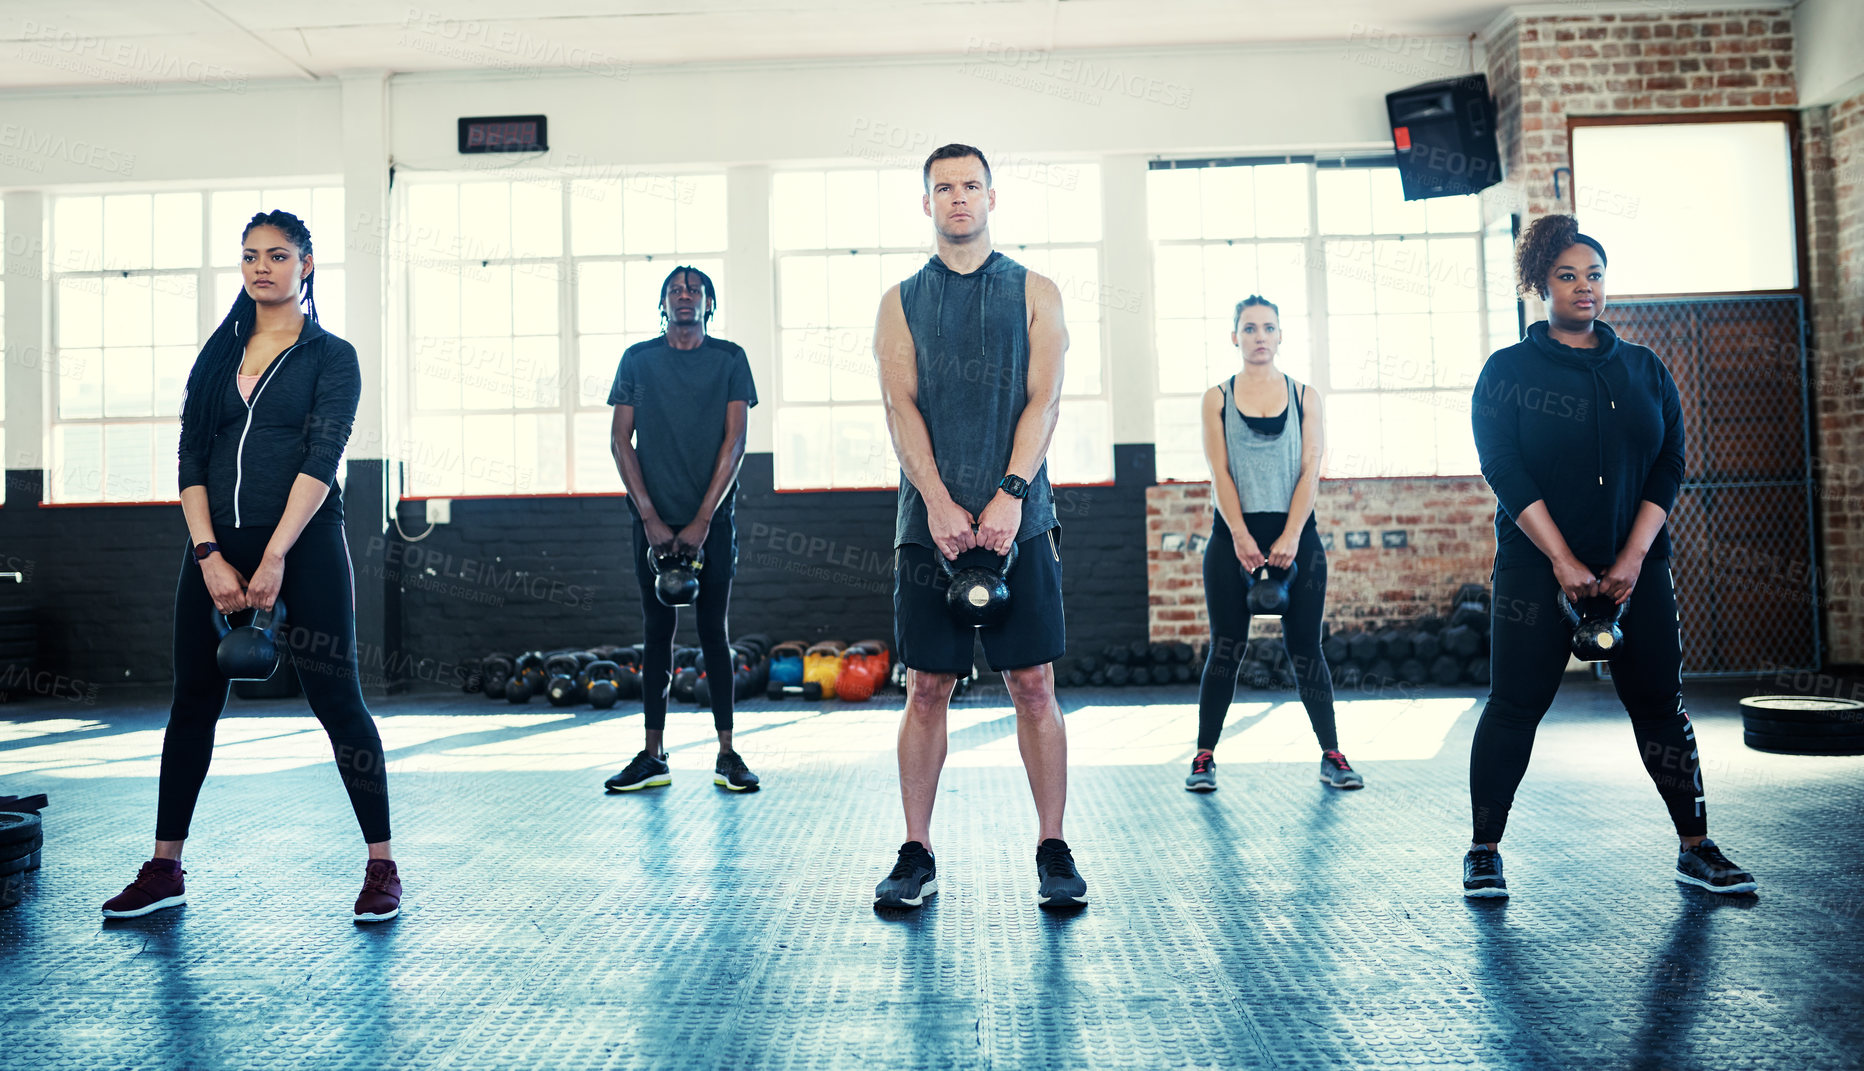 Buy stock photo Shot of a fitness group using kettle-bells in their session at the gym